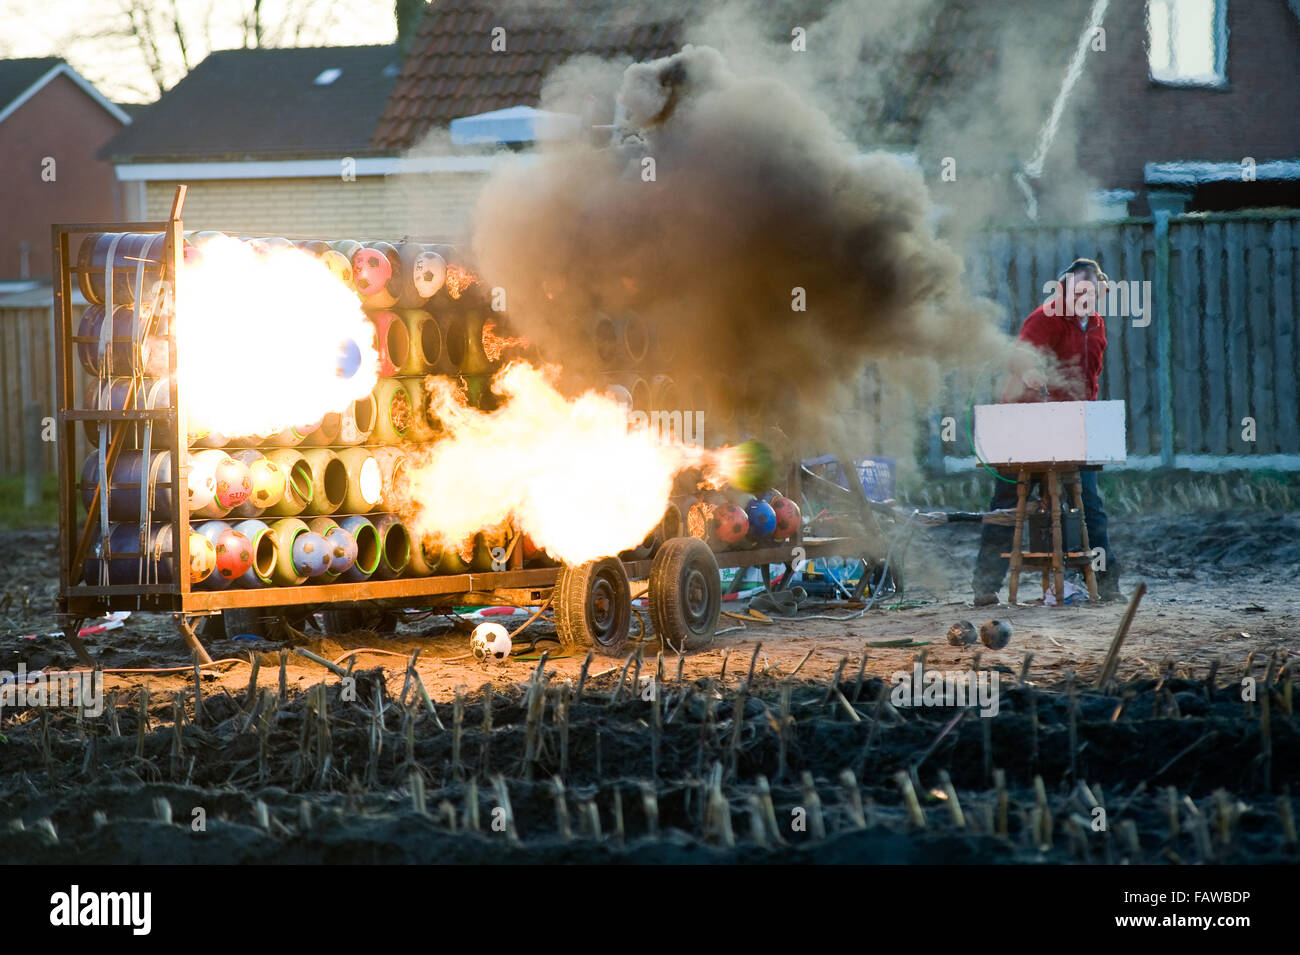 ENSCHEDE, NETHERLANDS - DEC 31, 2015: Carbide exploding is a tradition on new year's eve in The Netherlands and Belgium. Stock Photo